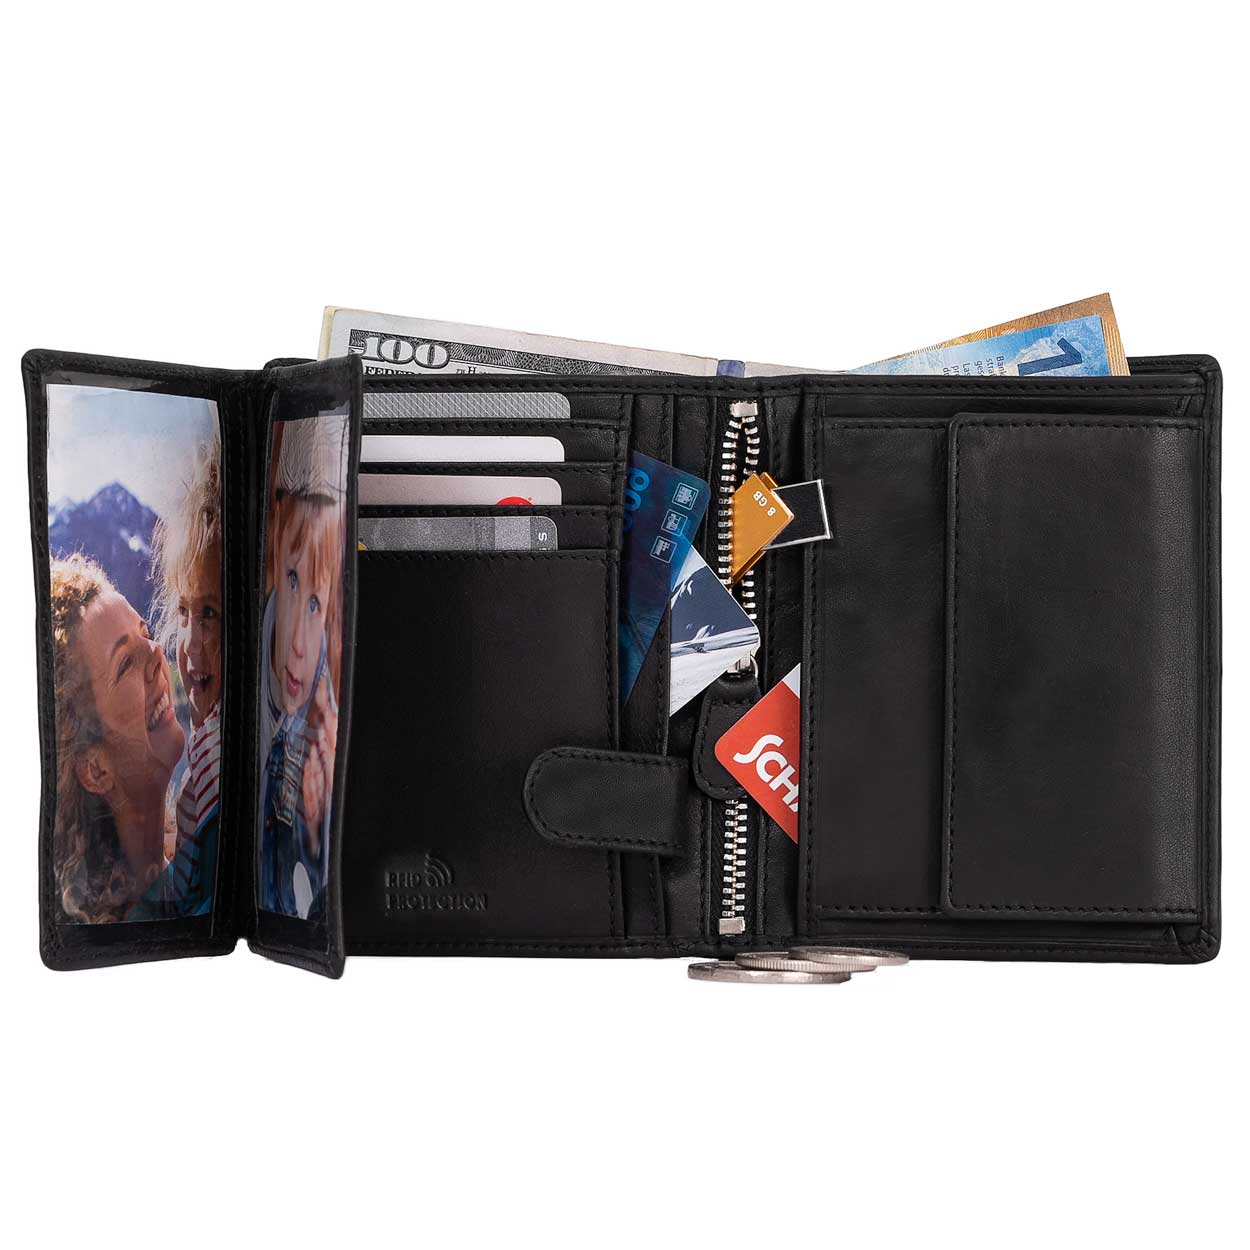 DiLoro Men's Compact Bifold Leather Wallet RFID Black